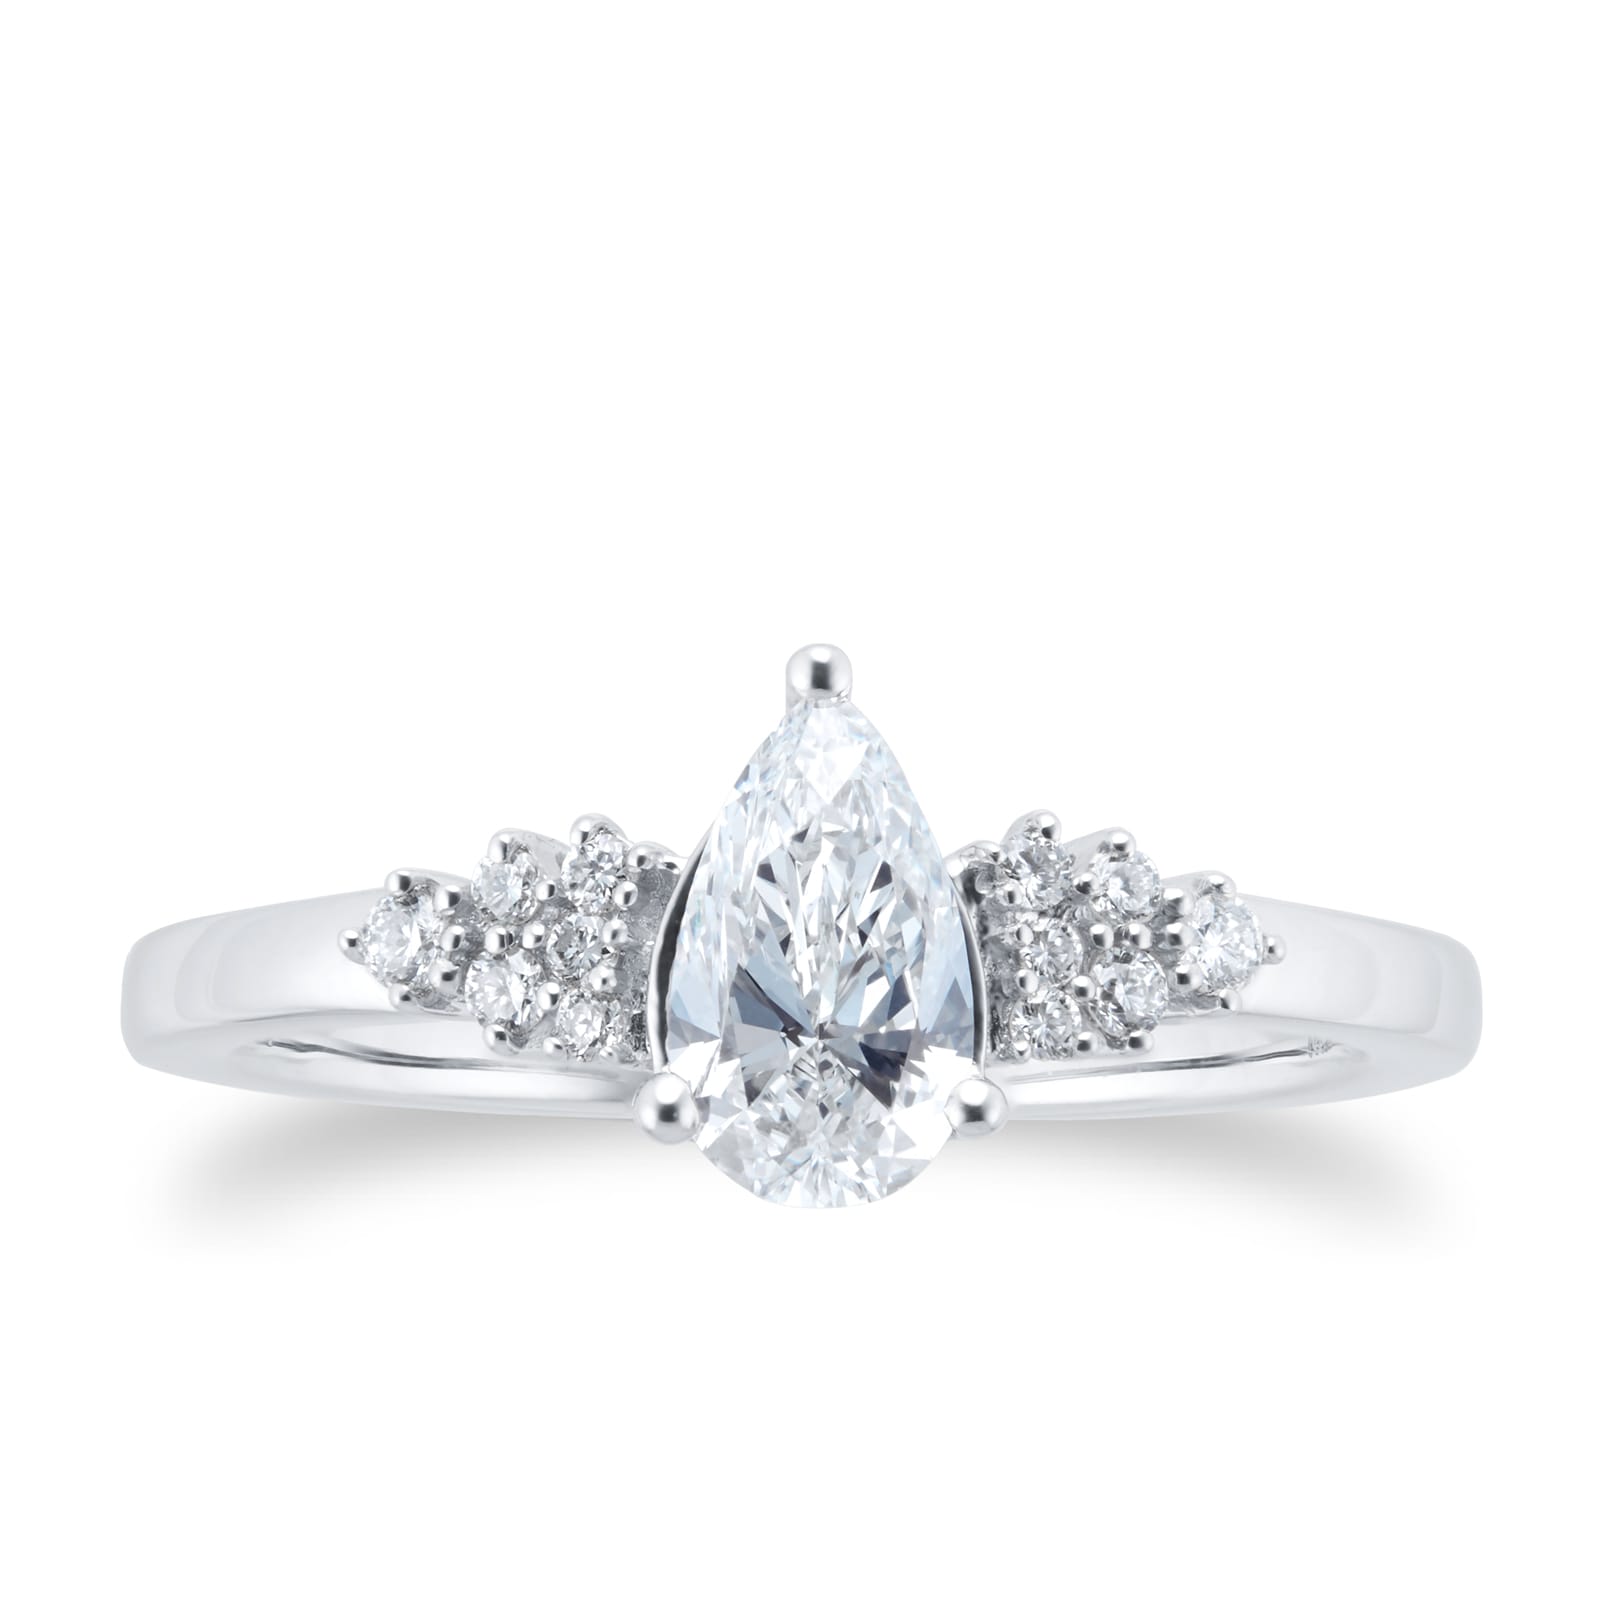 Platinum 0.70cttw Diamond Pear Scatter Engagement Ring - Ring Size K